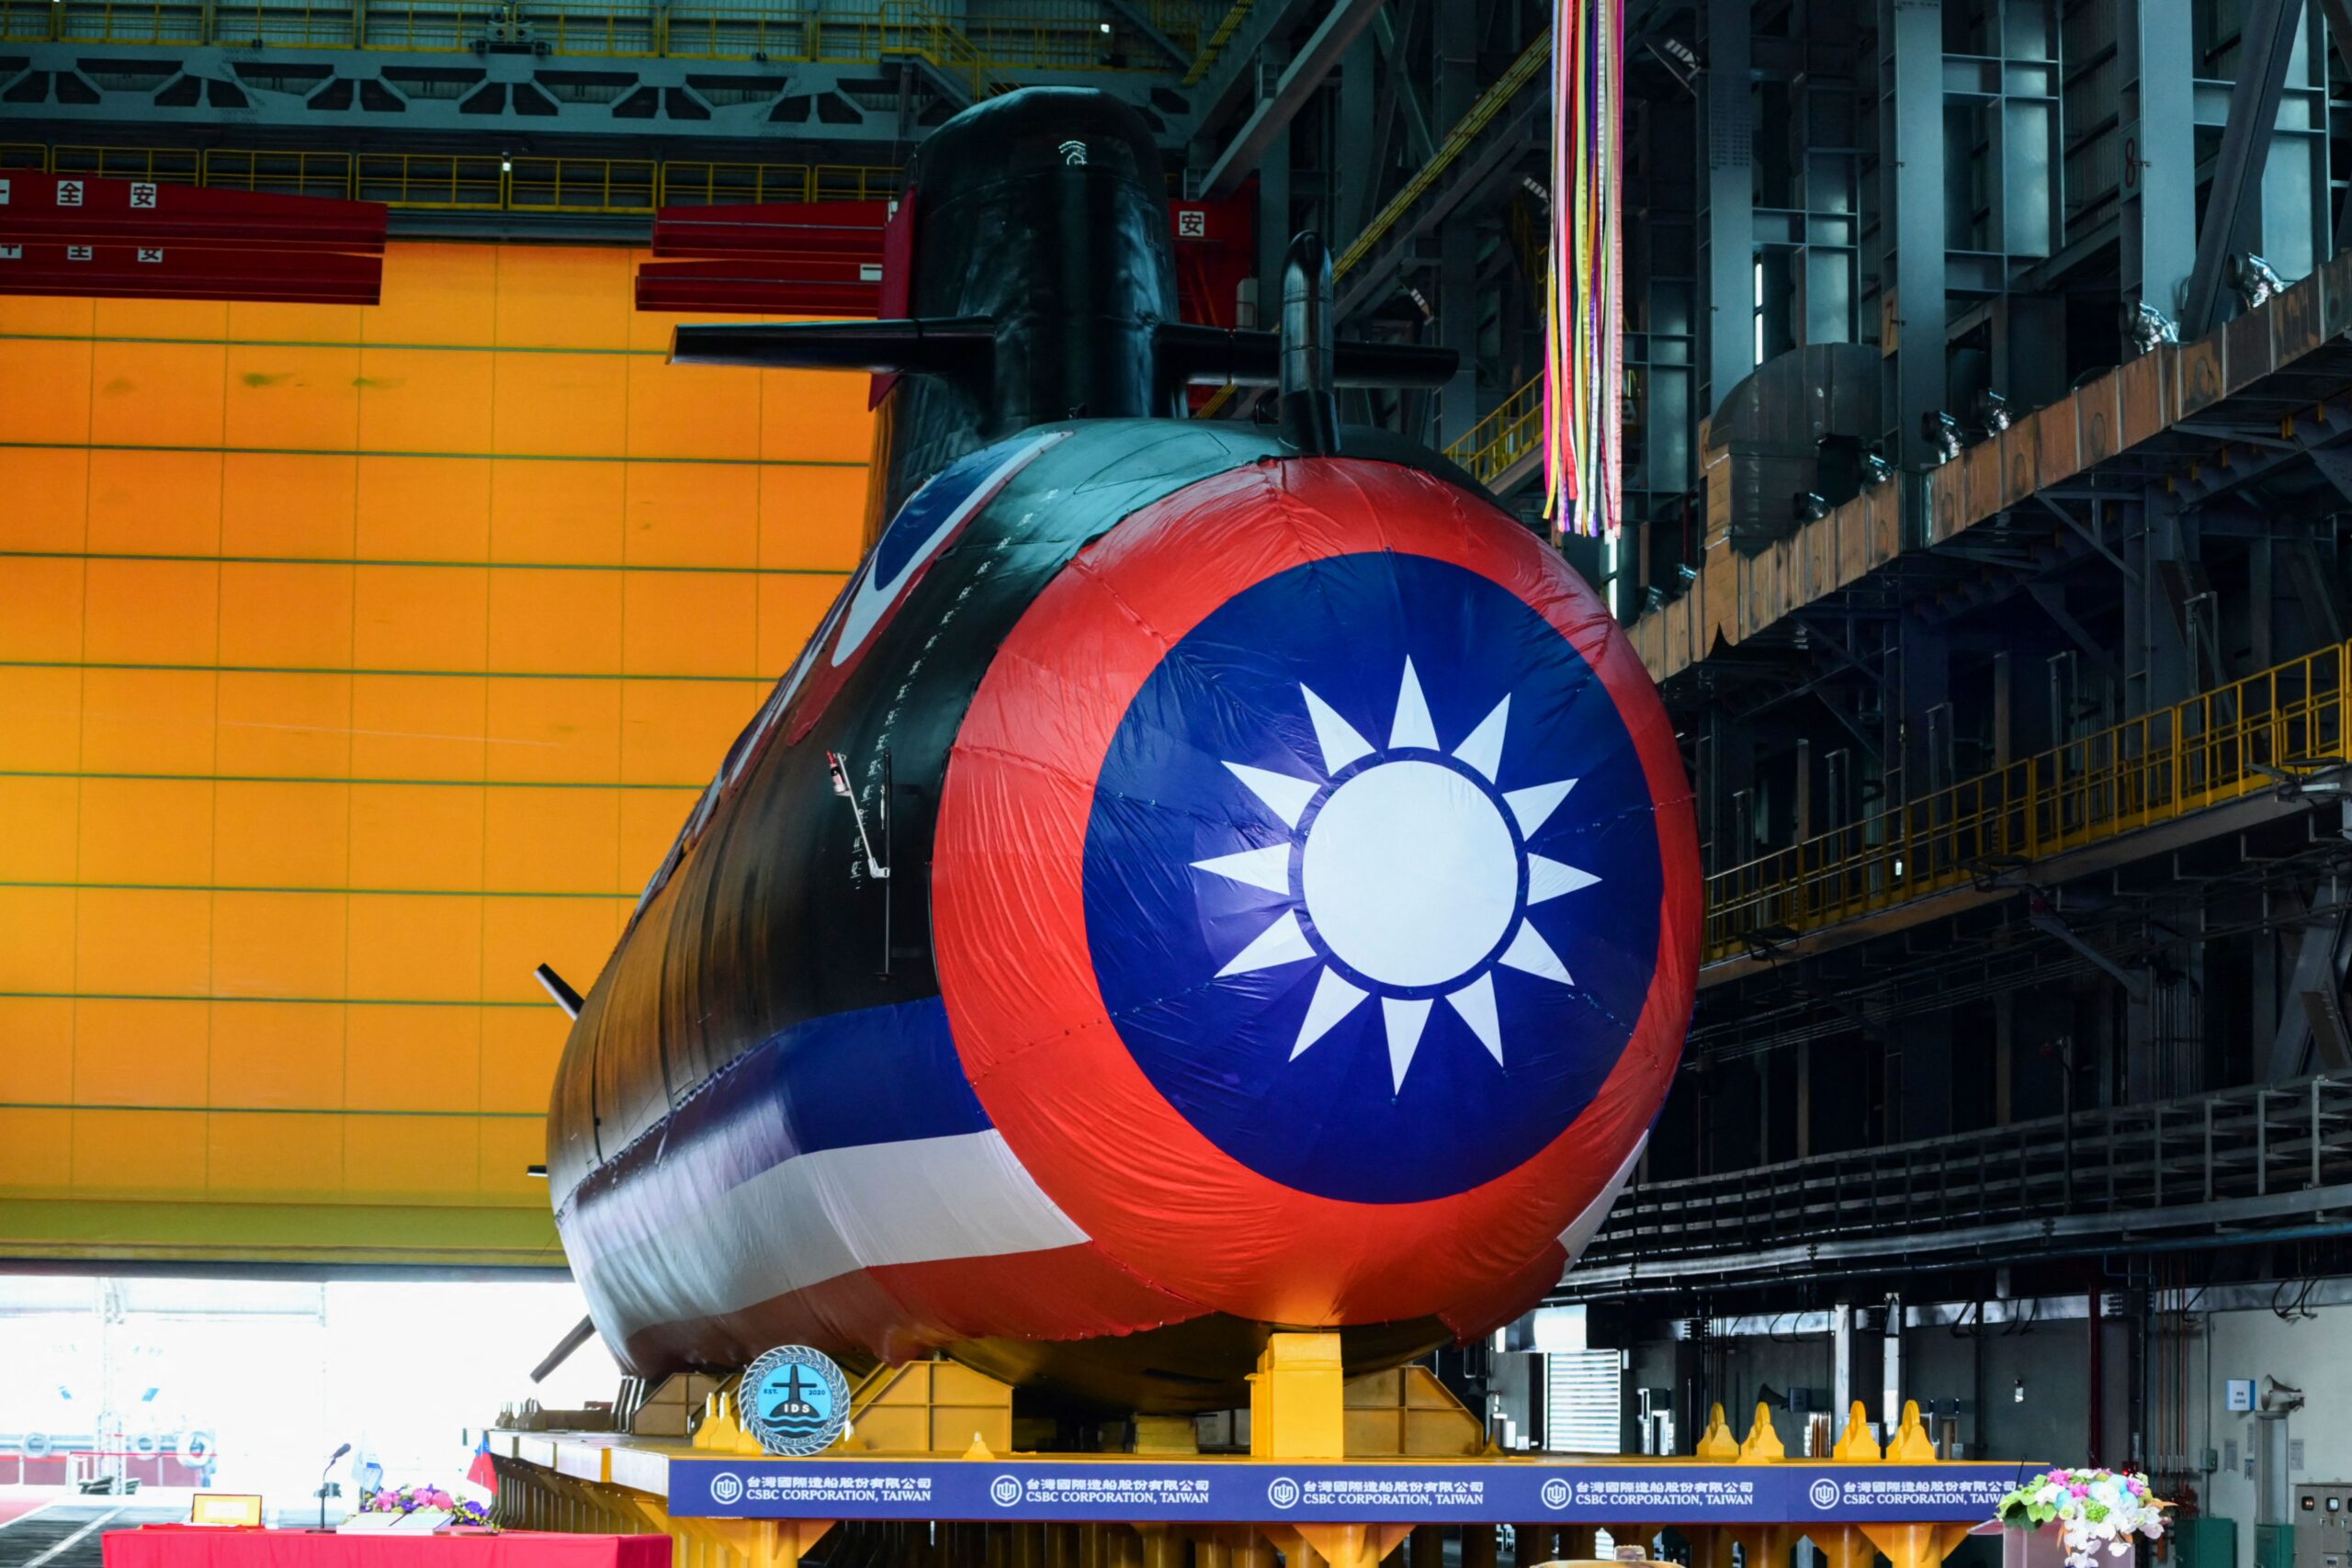 Taiwan's first locally built submarine "Narwhal" is seen before Taiwan's President Tsai Ing-wen unveils it at the CSBC Corporation shipbuilding company in Kaohsiung on September 28, 2023. (Photo by Sam Yeh / AFP) (Photo by SAM YEH/AFP via Getty Images)